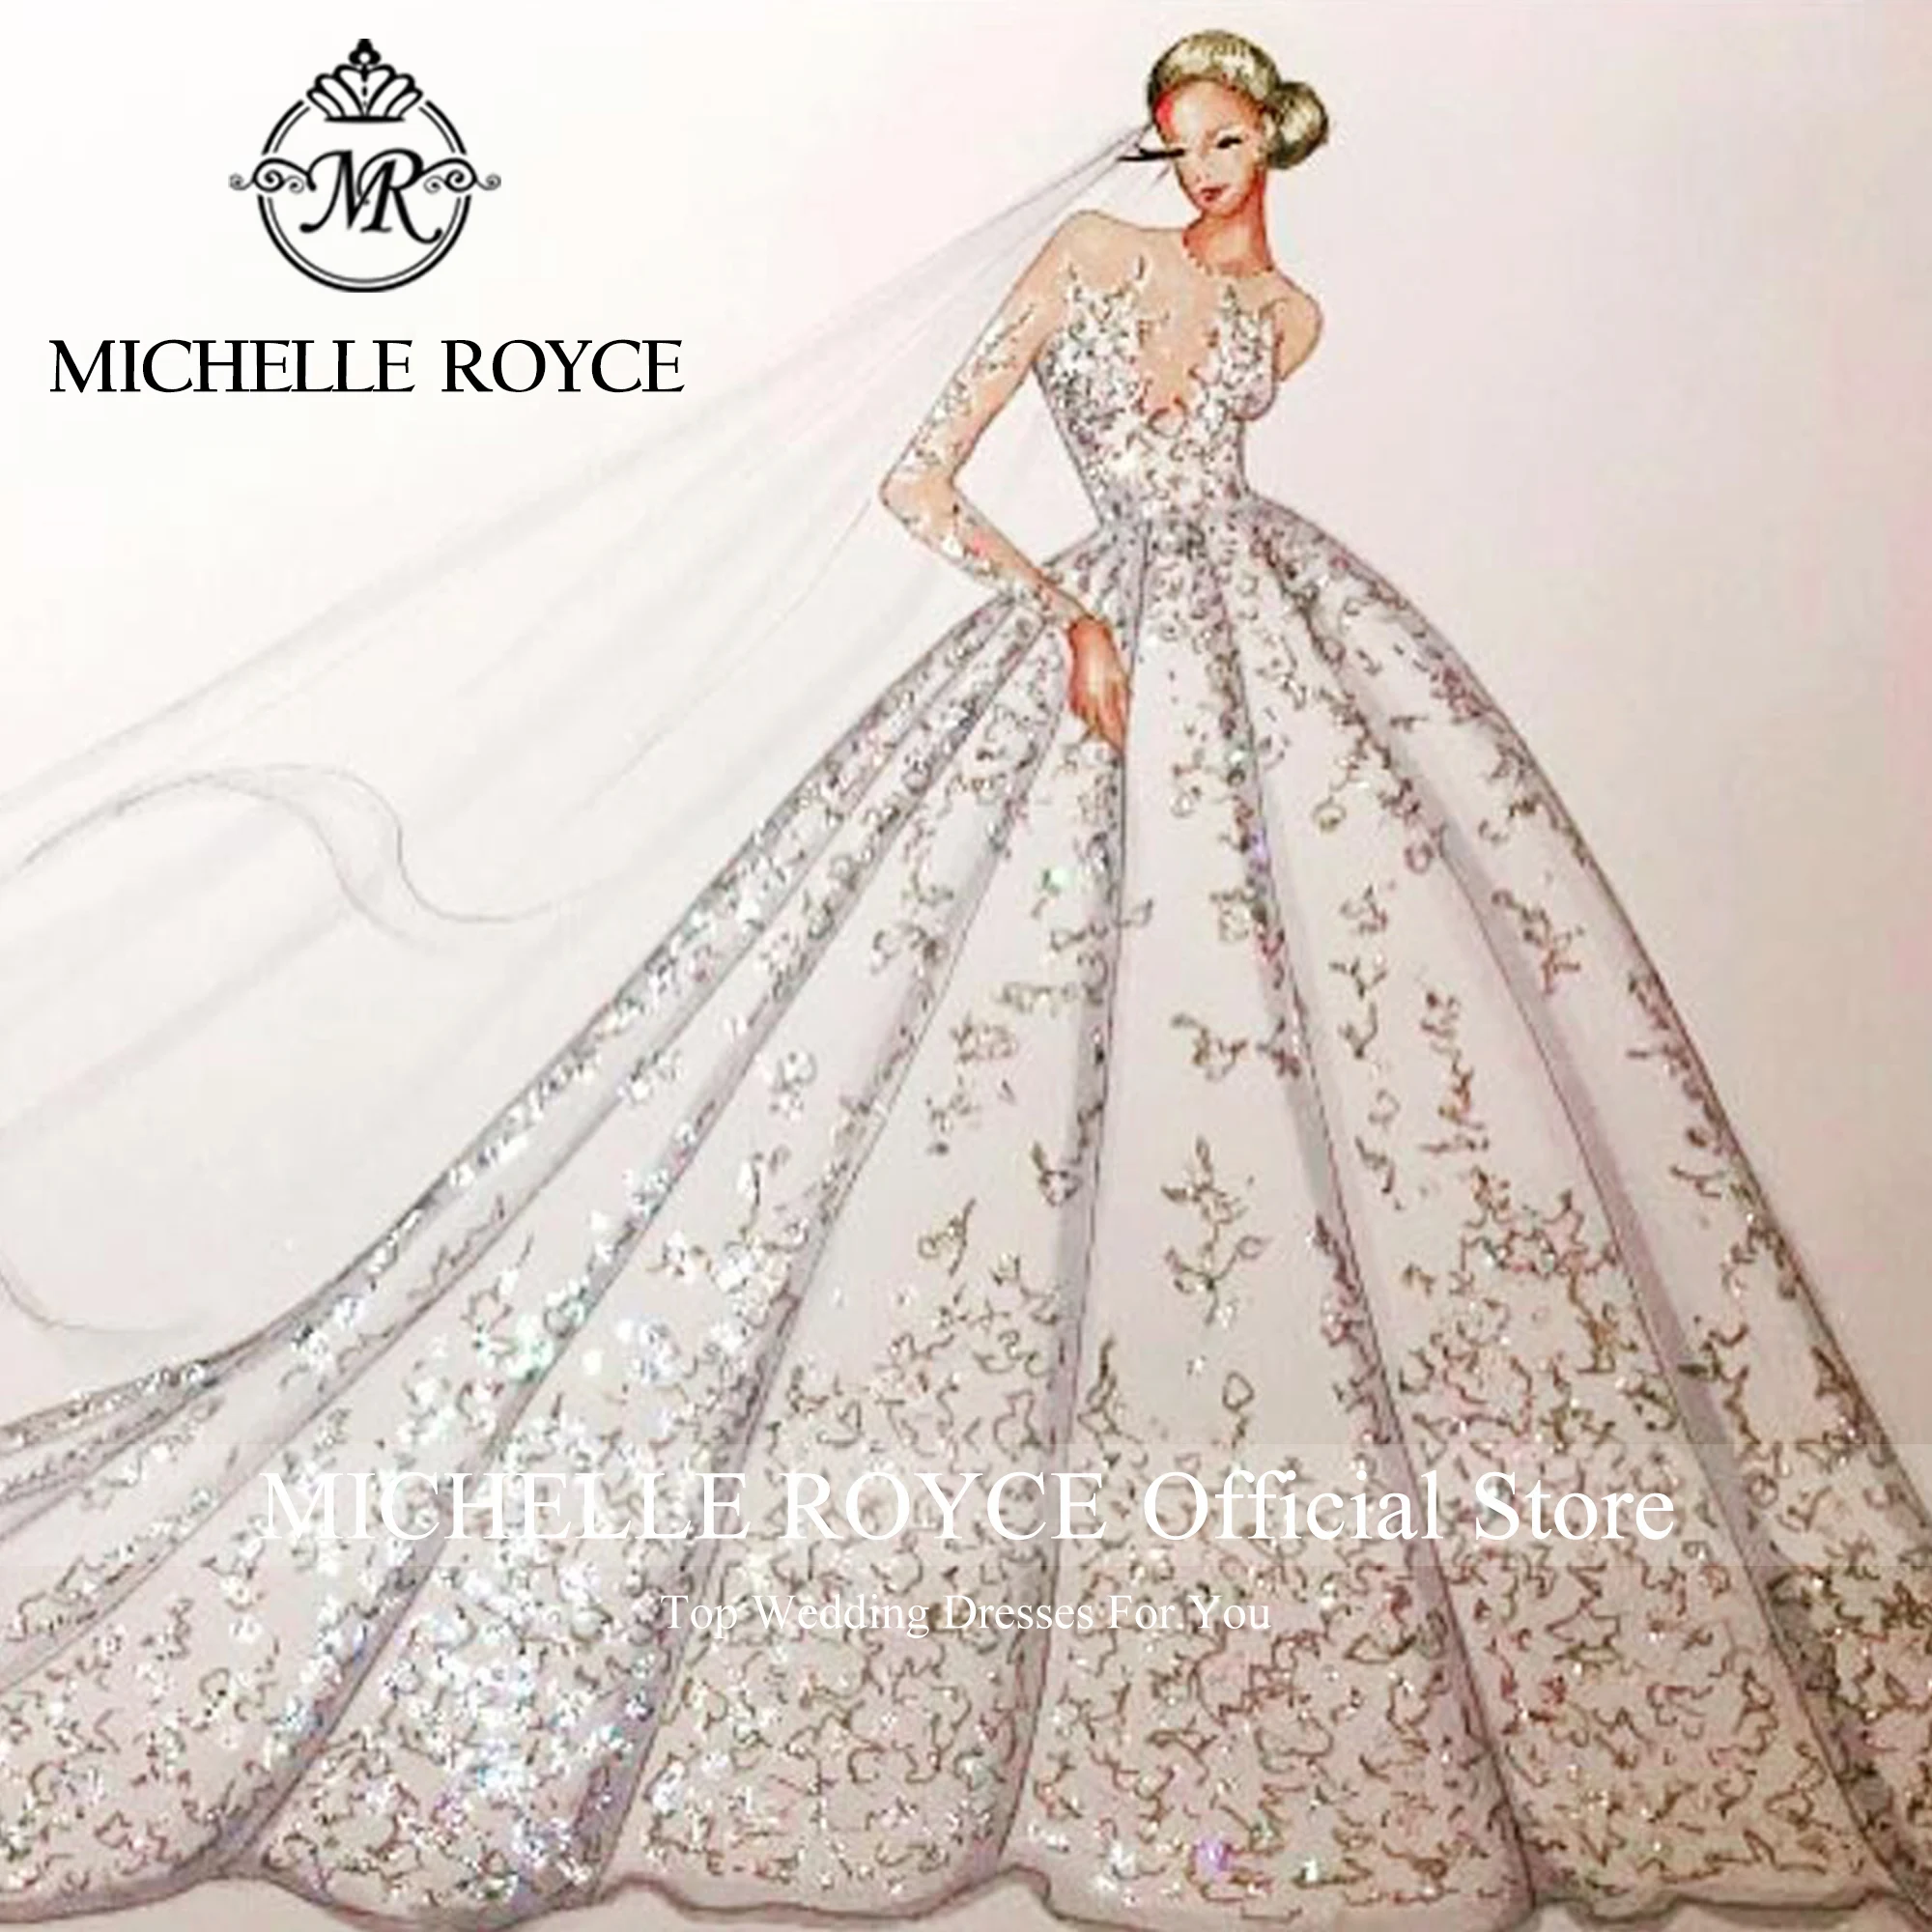 

Ball Gown Custom wedding dress production costs